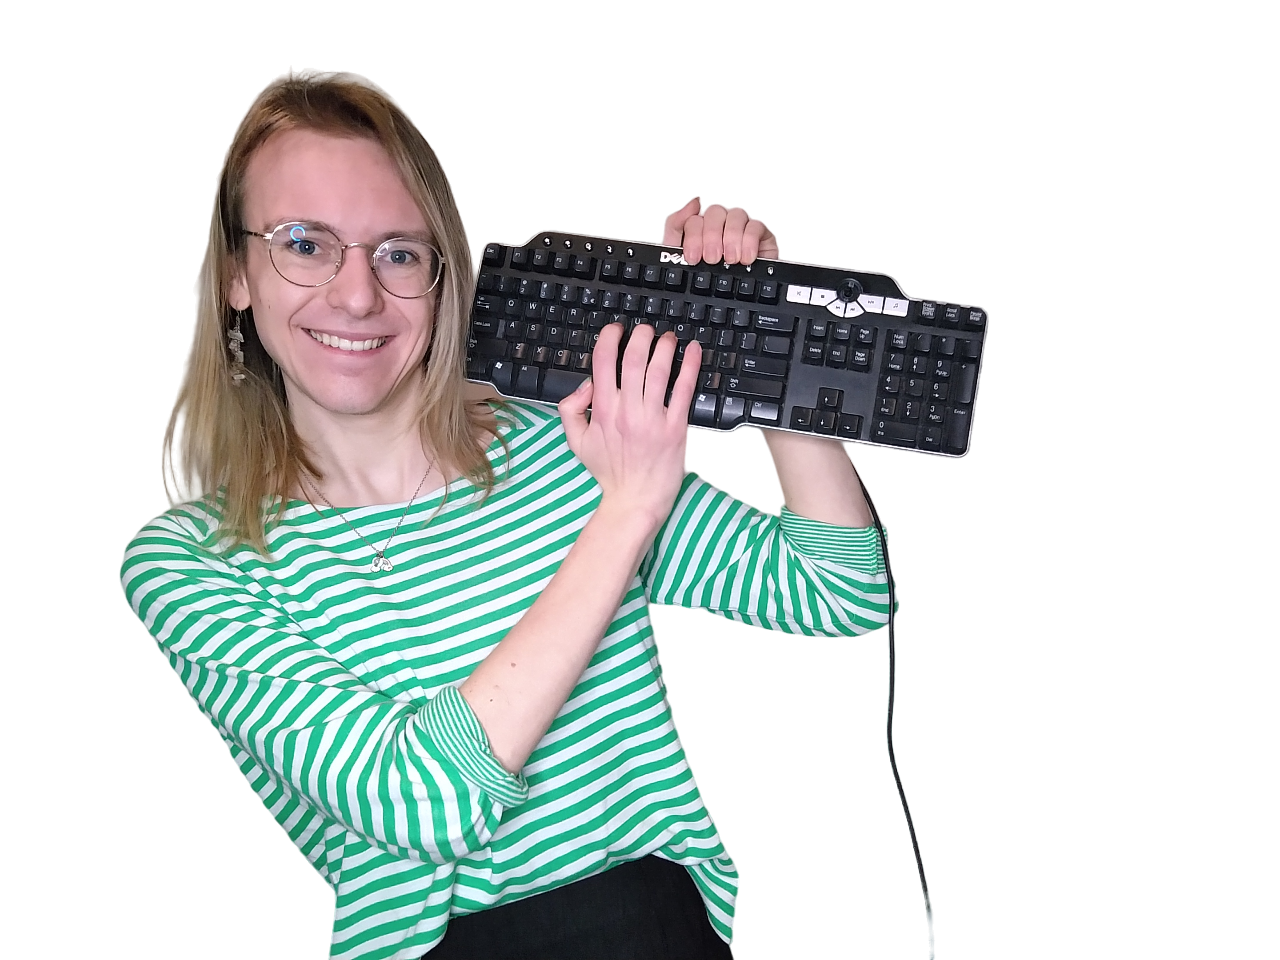 Jenny is holding a computer keyboard next to her head. Her other hand is on the keys. She's looking into the camera and smiling.